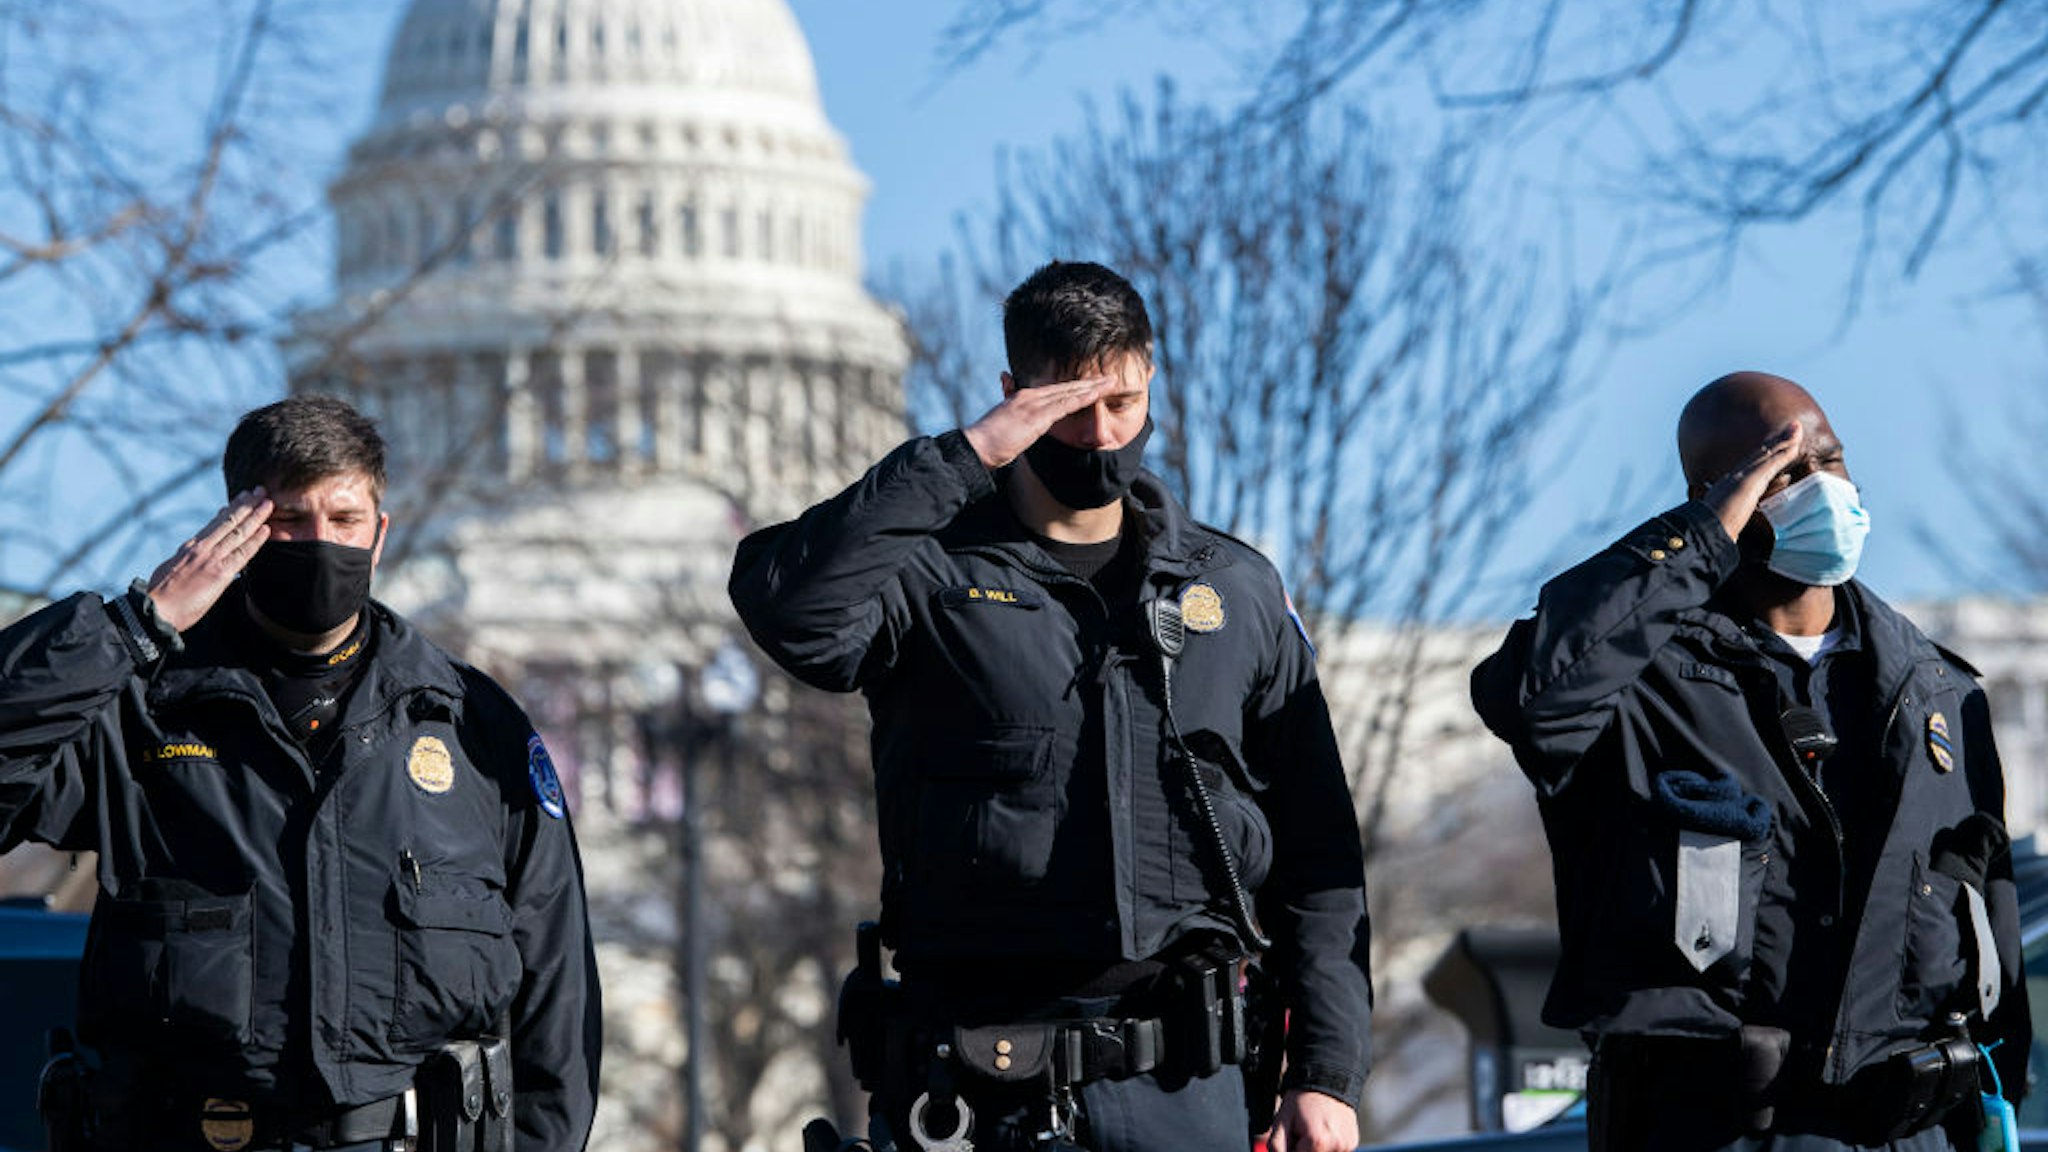 U.S. Capitol Police officers salute as a hearse carrying the body of Officer Brian D. Sicknick, who was killed by rioters Wednesday, passes members of the Capitol and Metropolitan police during a procession on Third Street on Sunday, January 10, 2021.